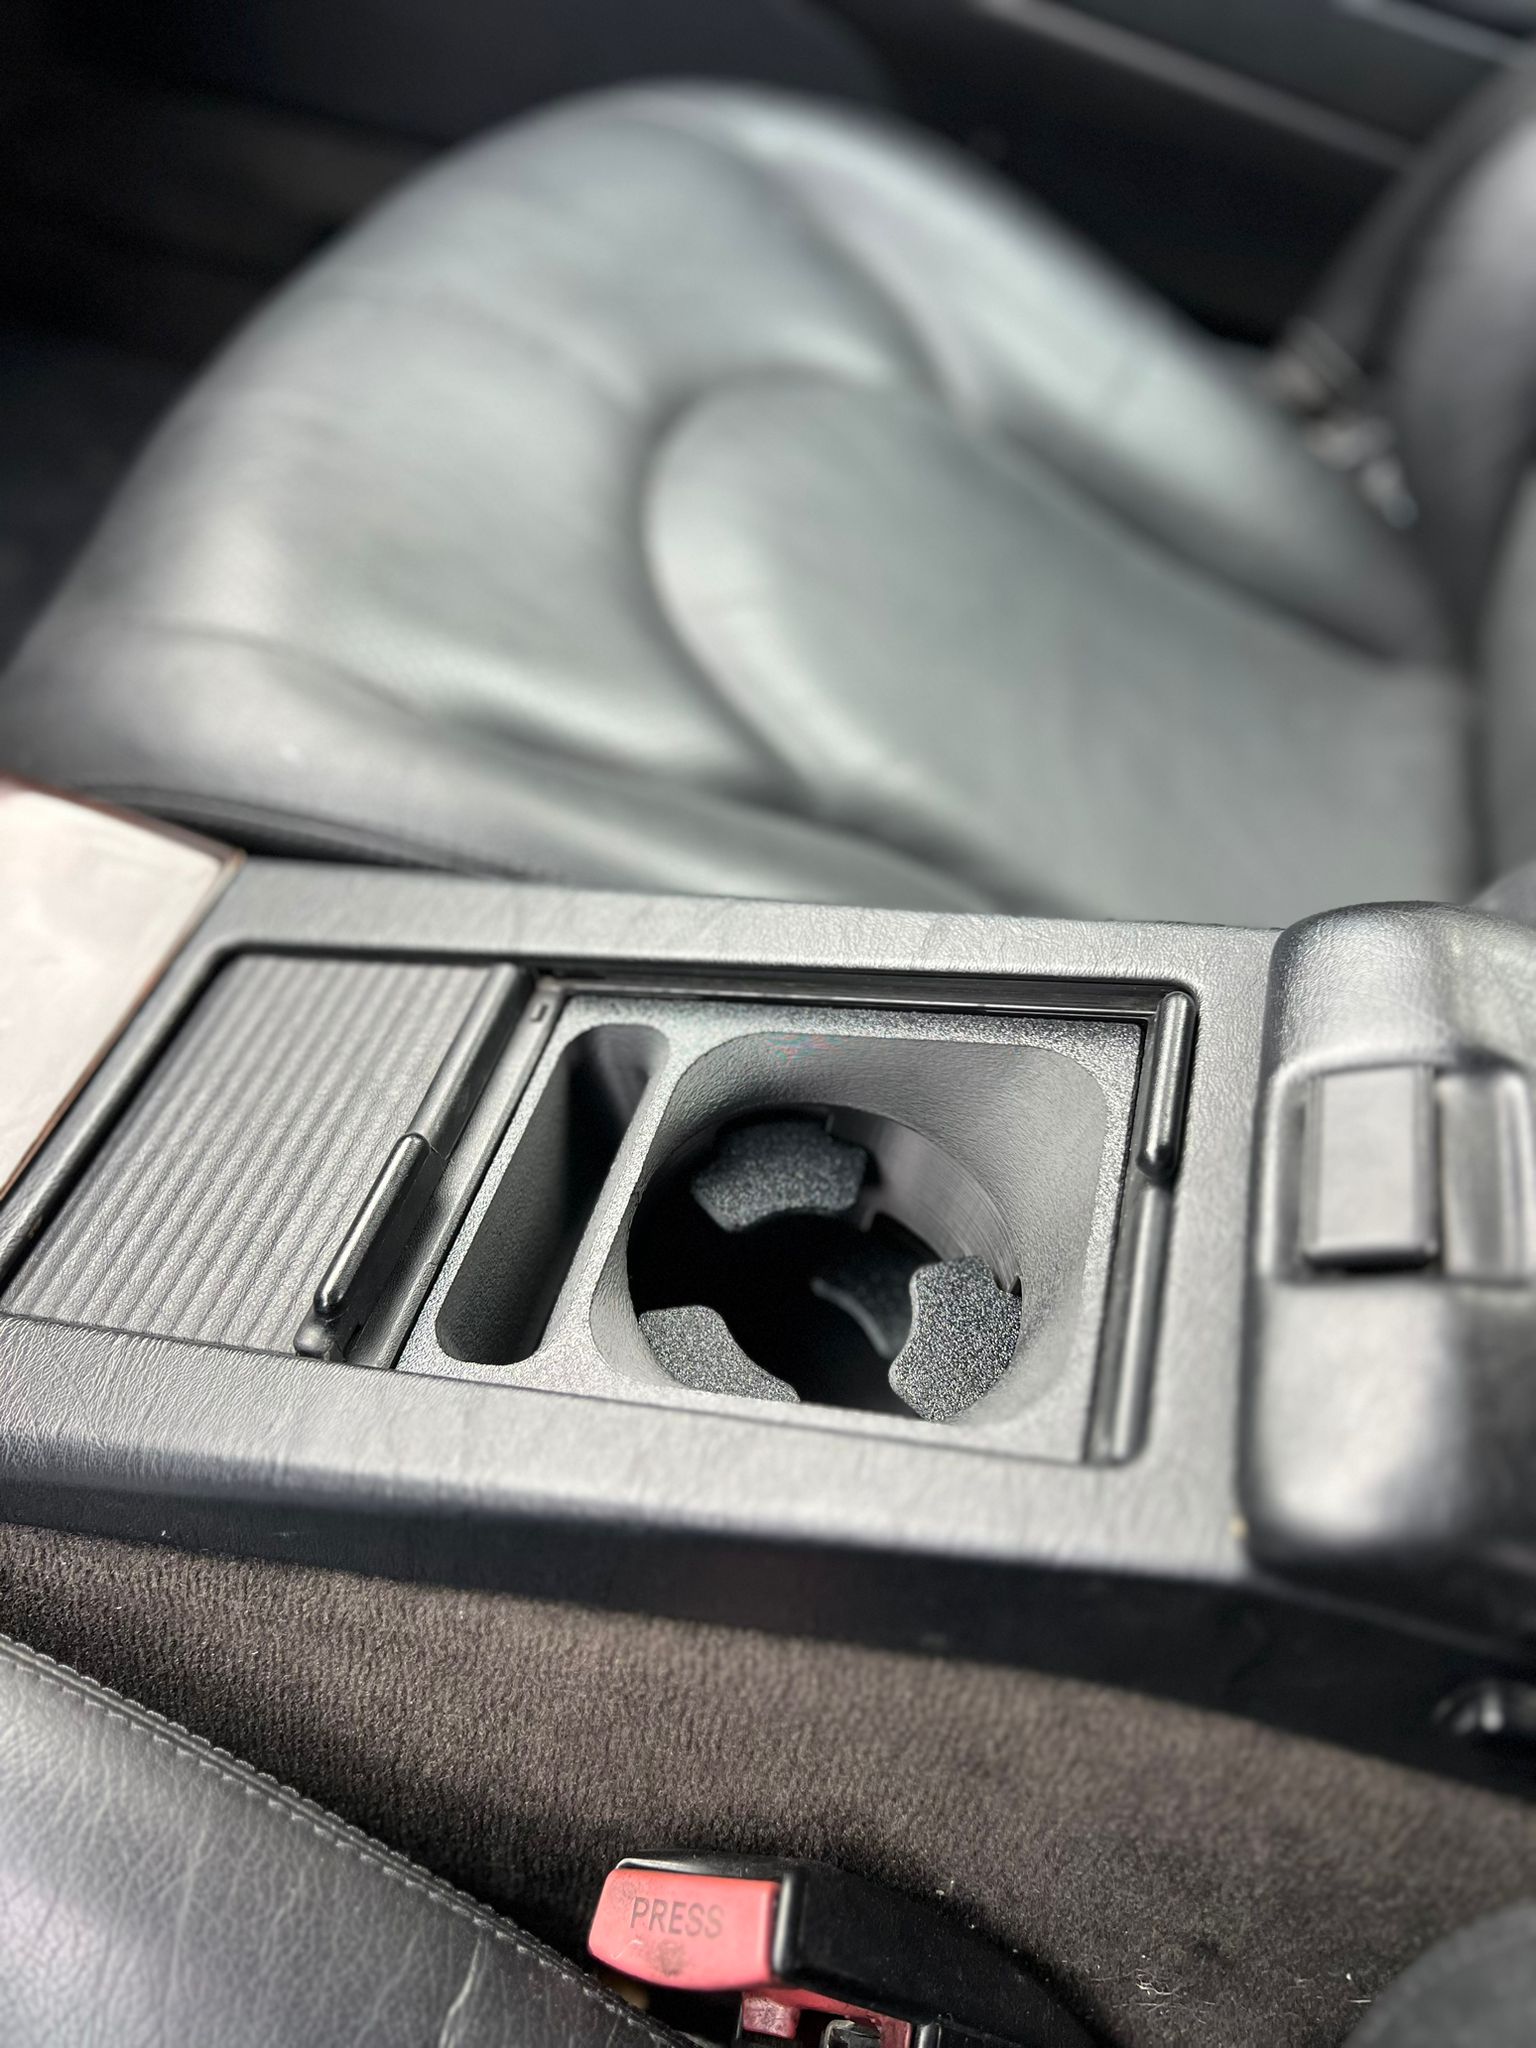 Mercedes R129 SL Custom Cup Holder And Mobile Phone Holder - Cupholder  Replacement for Center Console Storage Box - OctoClassic